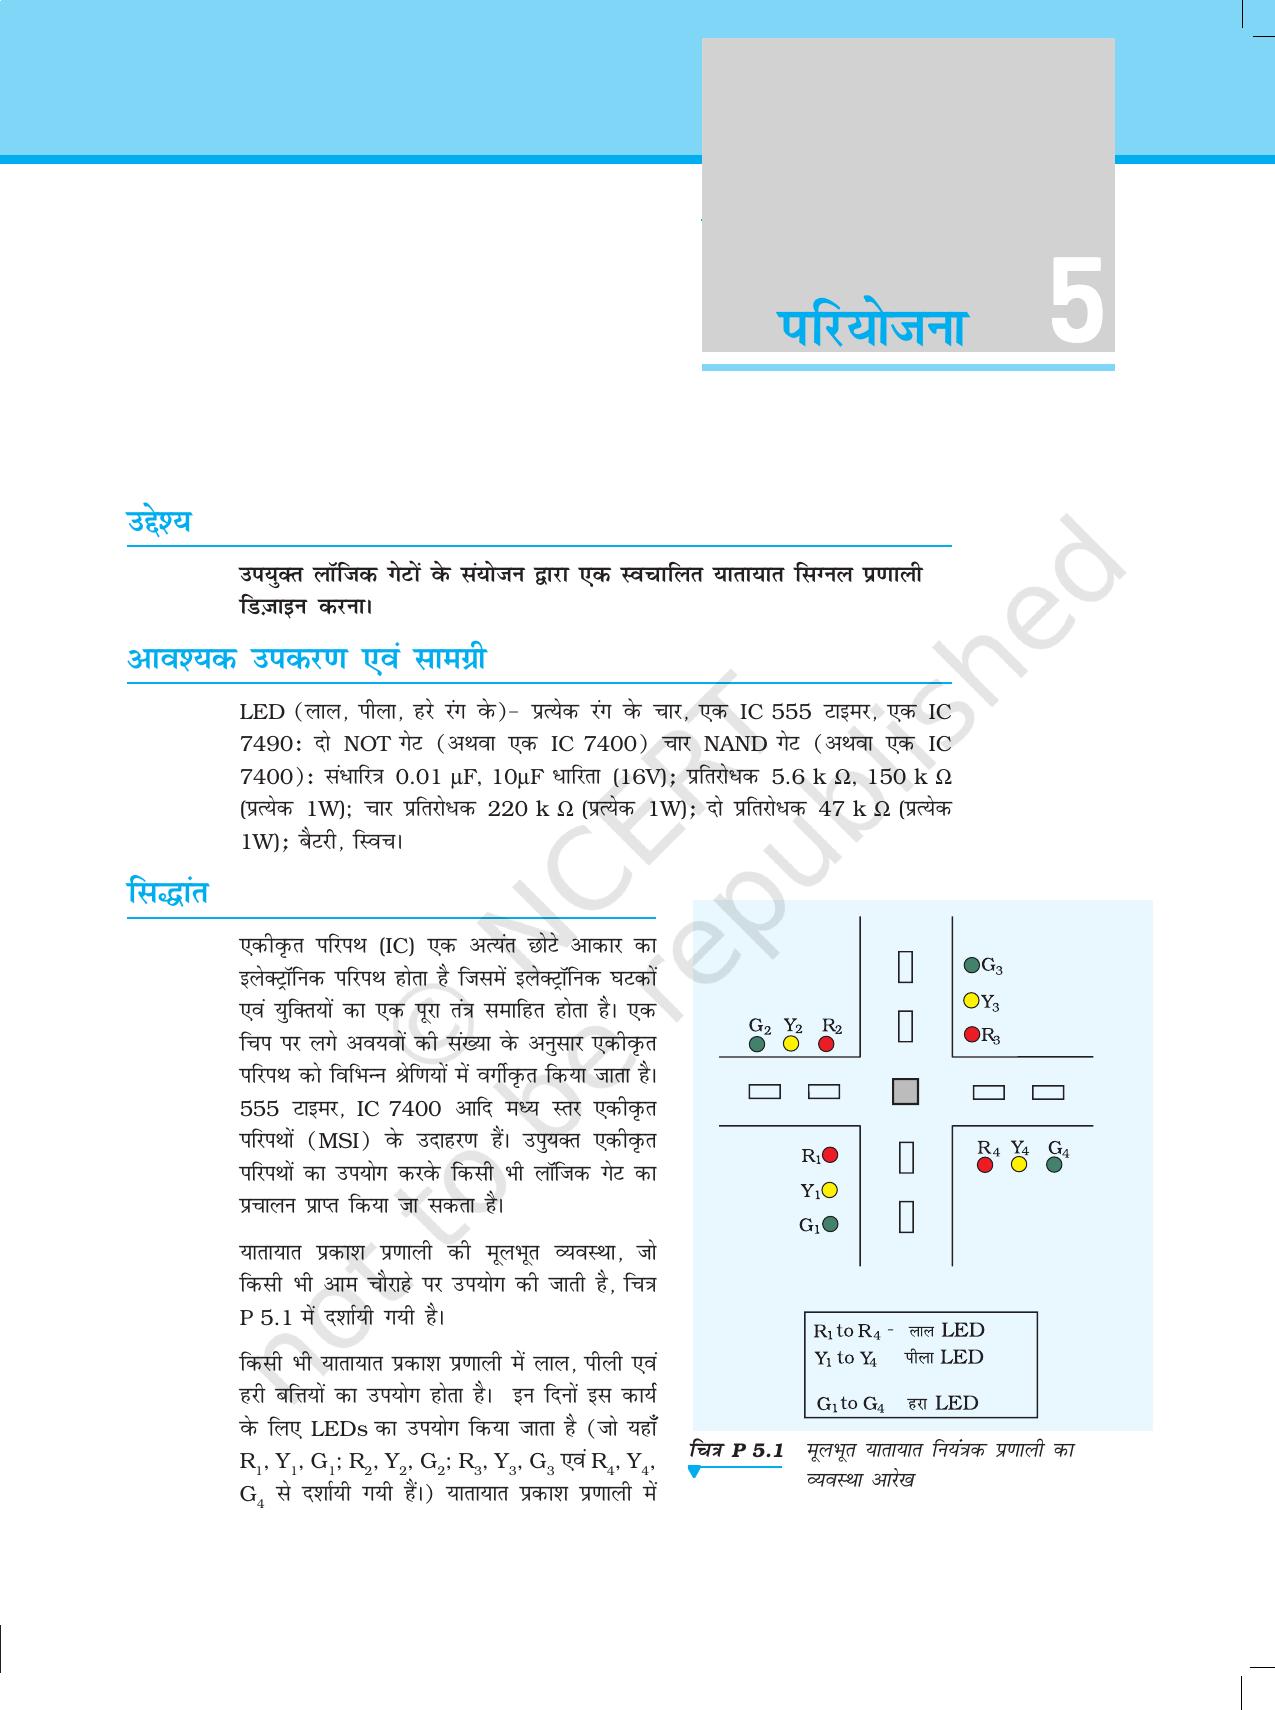 NCERT Laboratory Manuals for Class XII भौतिकी - परियोजना (1 - 7) - Page 17